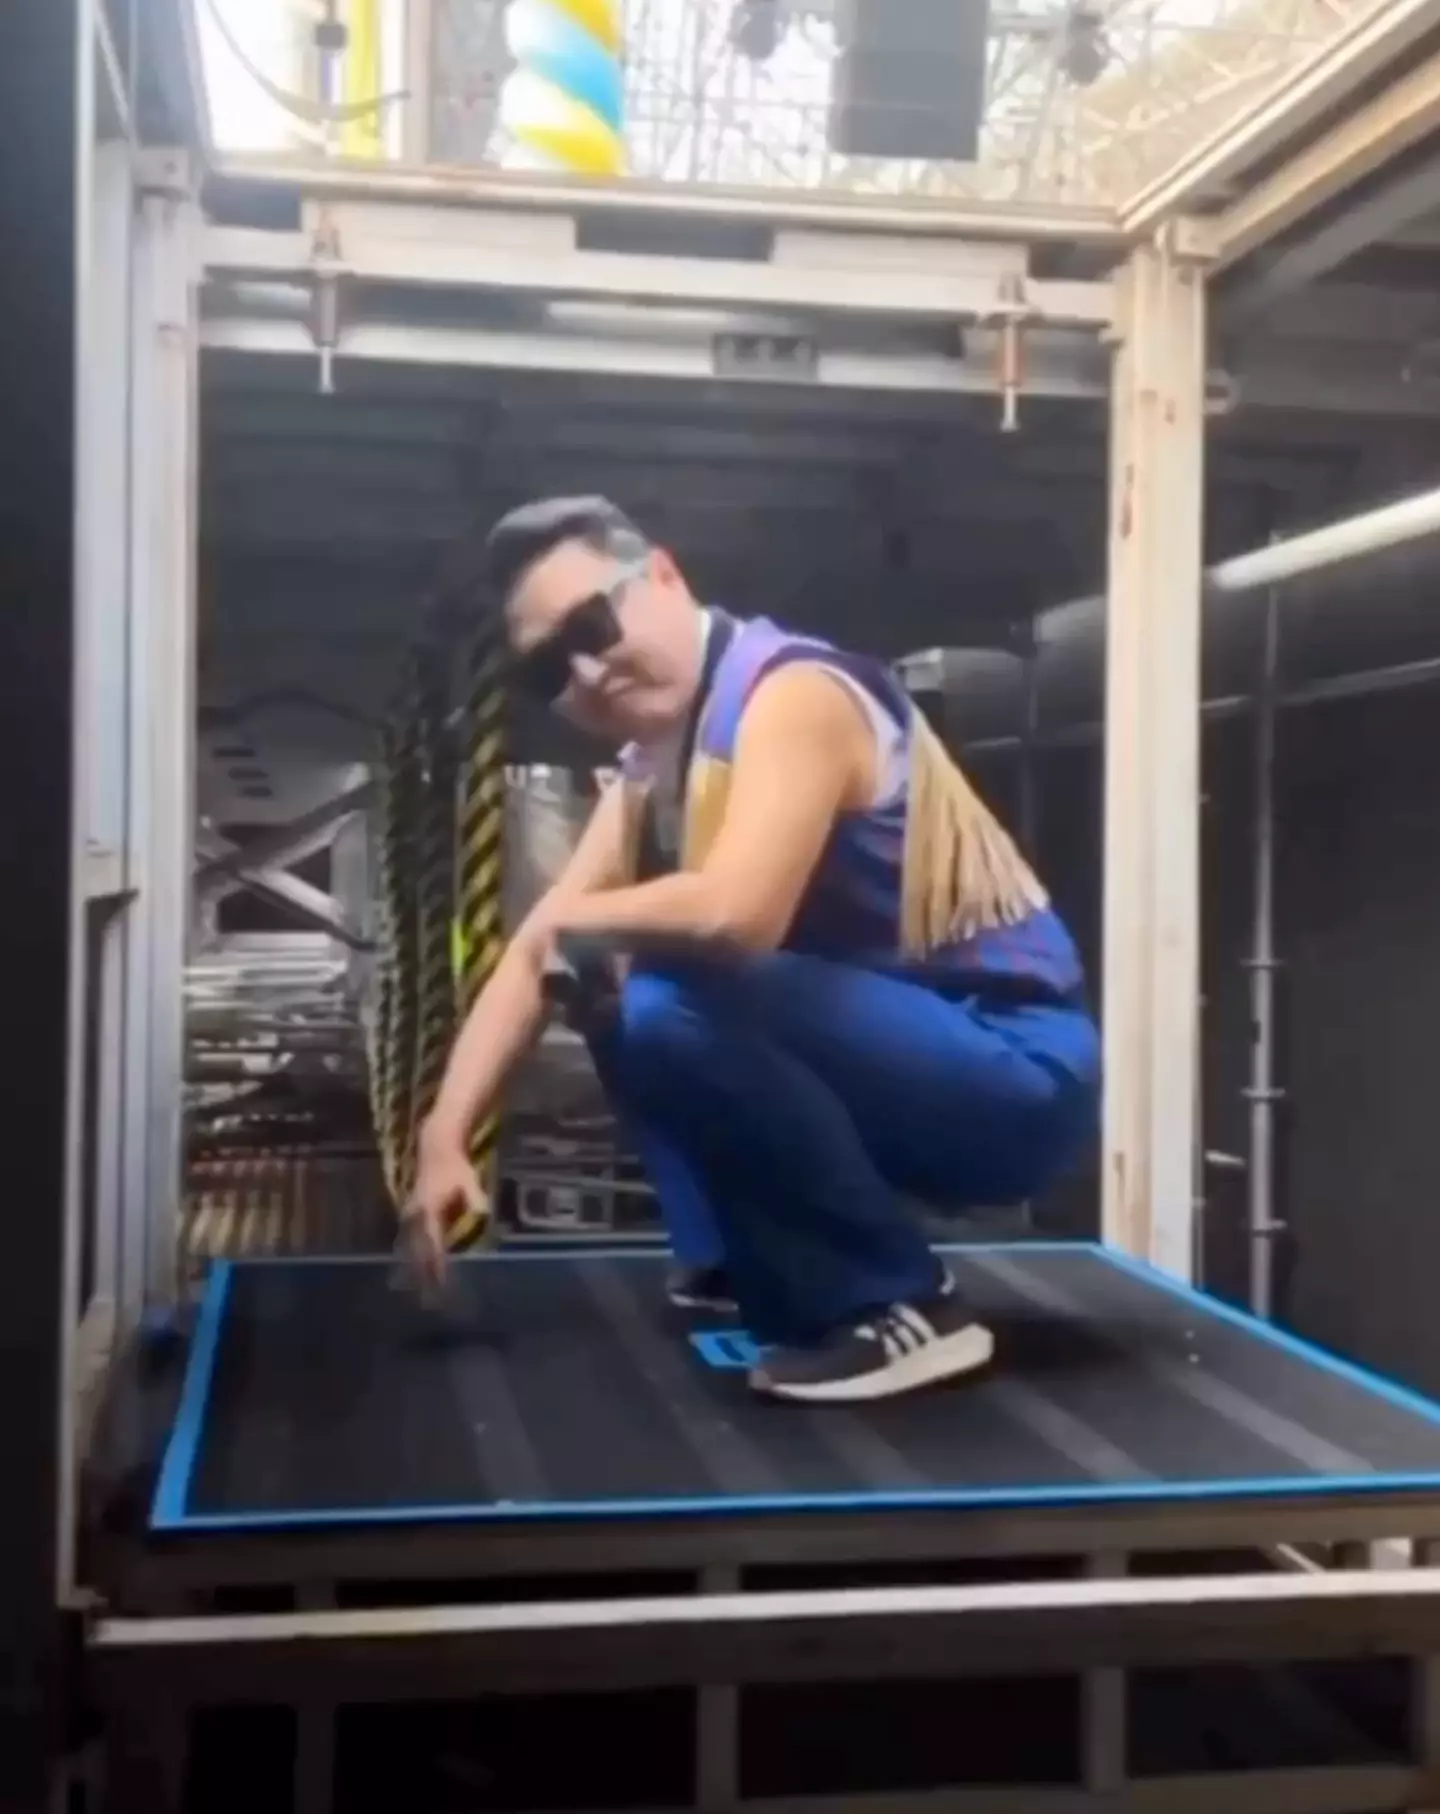 Psy shared a video of a particularly impressive stage entrance.